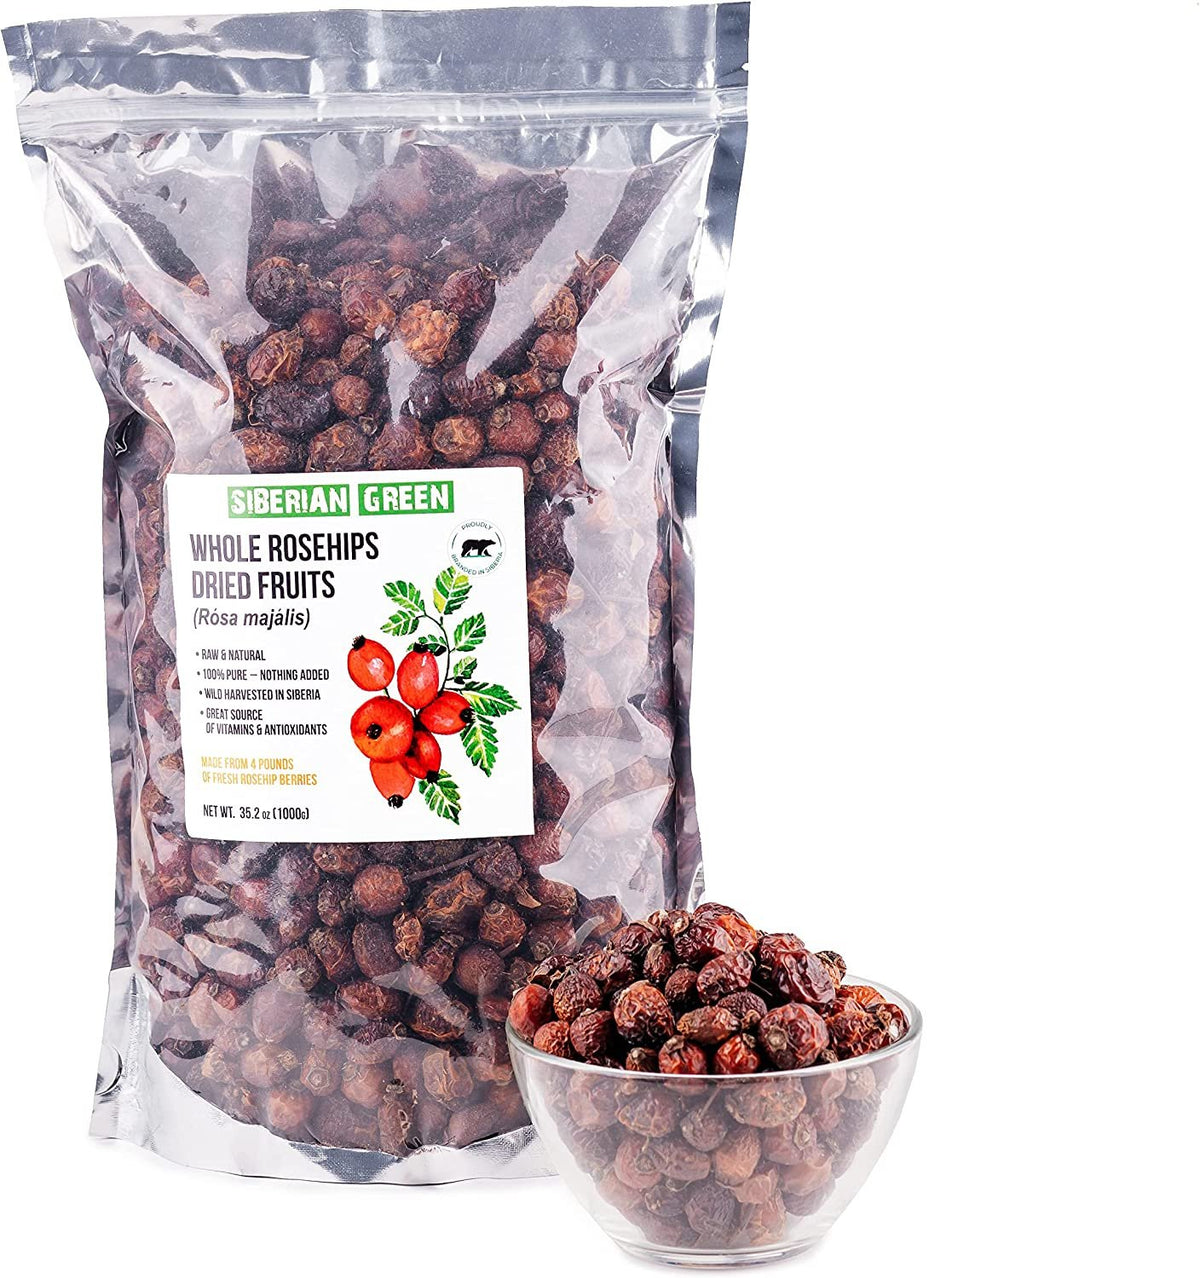 Siberian Dried Rose Hips Whole 1 kg (2.2 lbs) - Rosehips Herbal Berries Tea Directly from Altai Mountains and Taiga